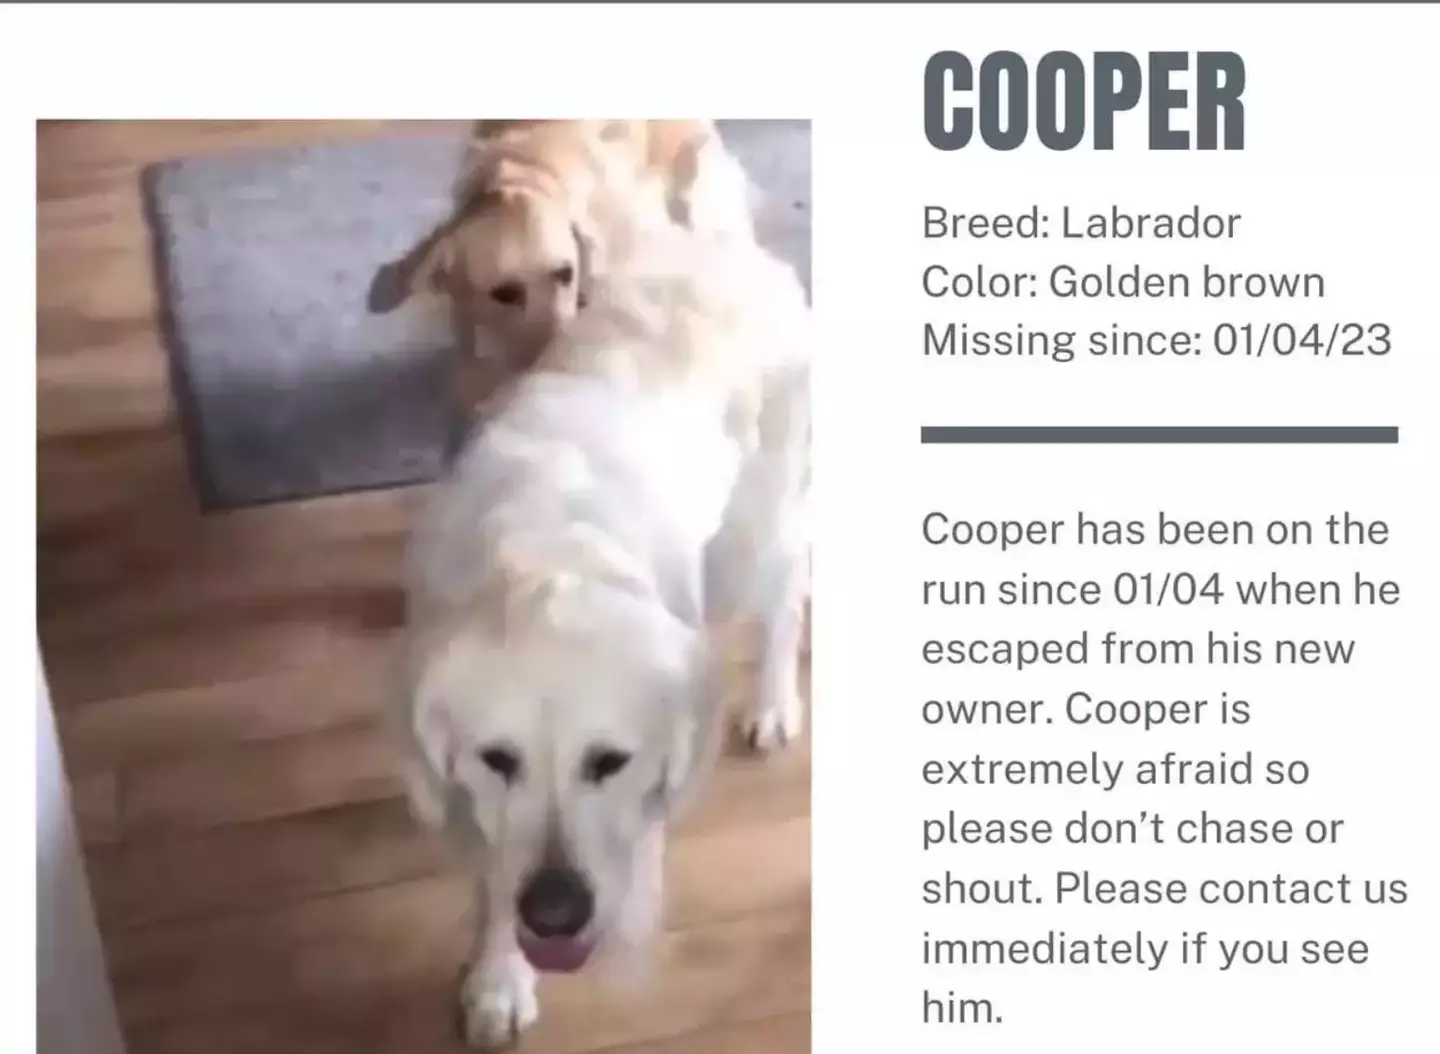 Lost Paws NI put up posters to try and find Cooper.